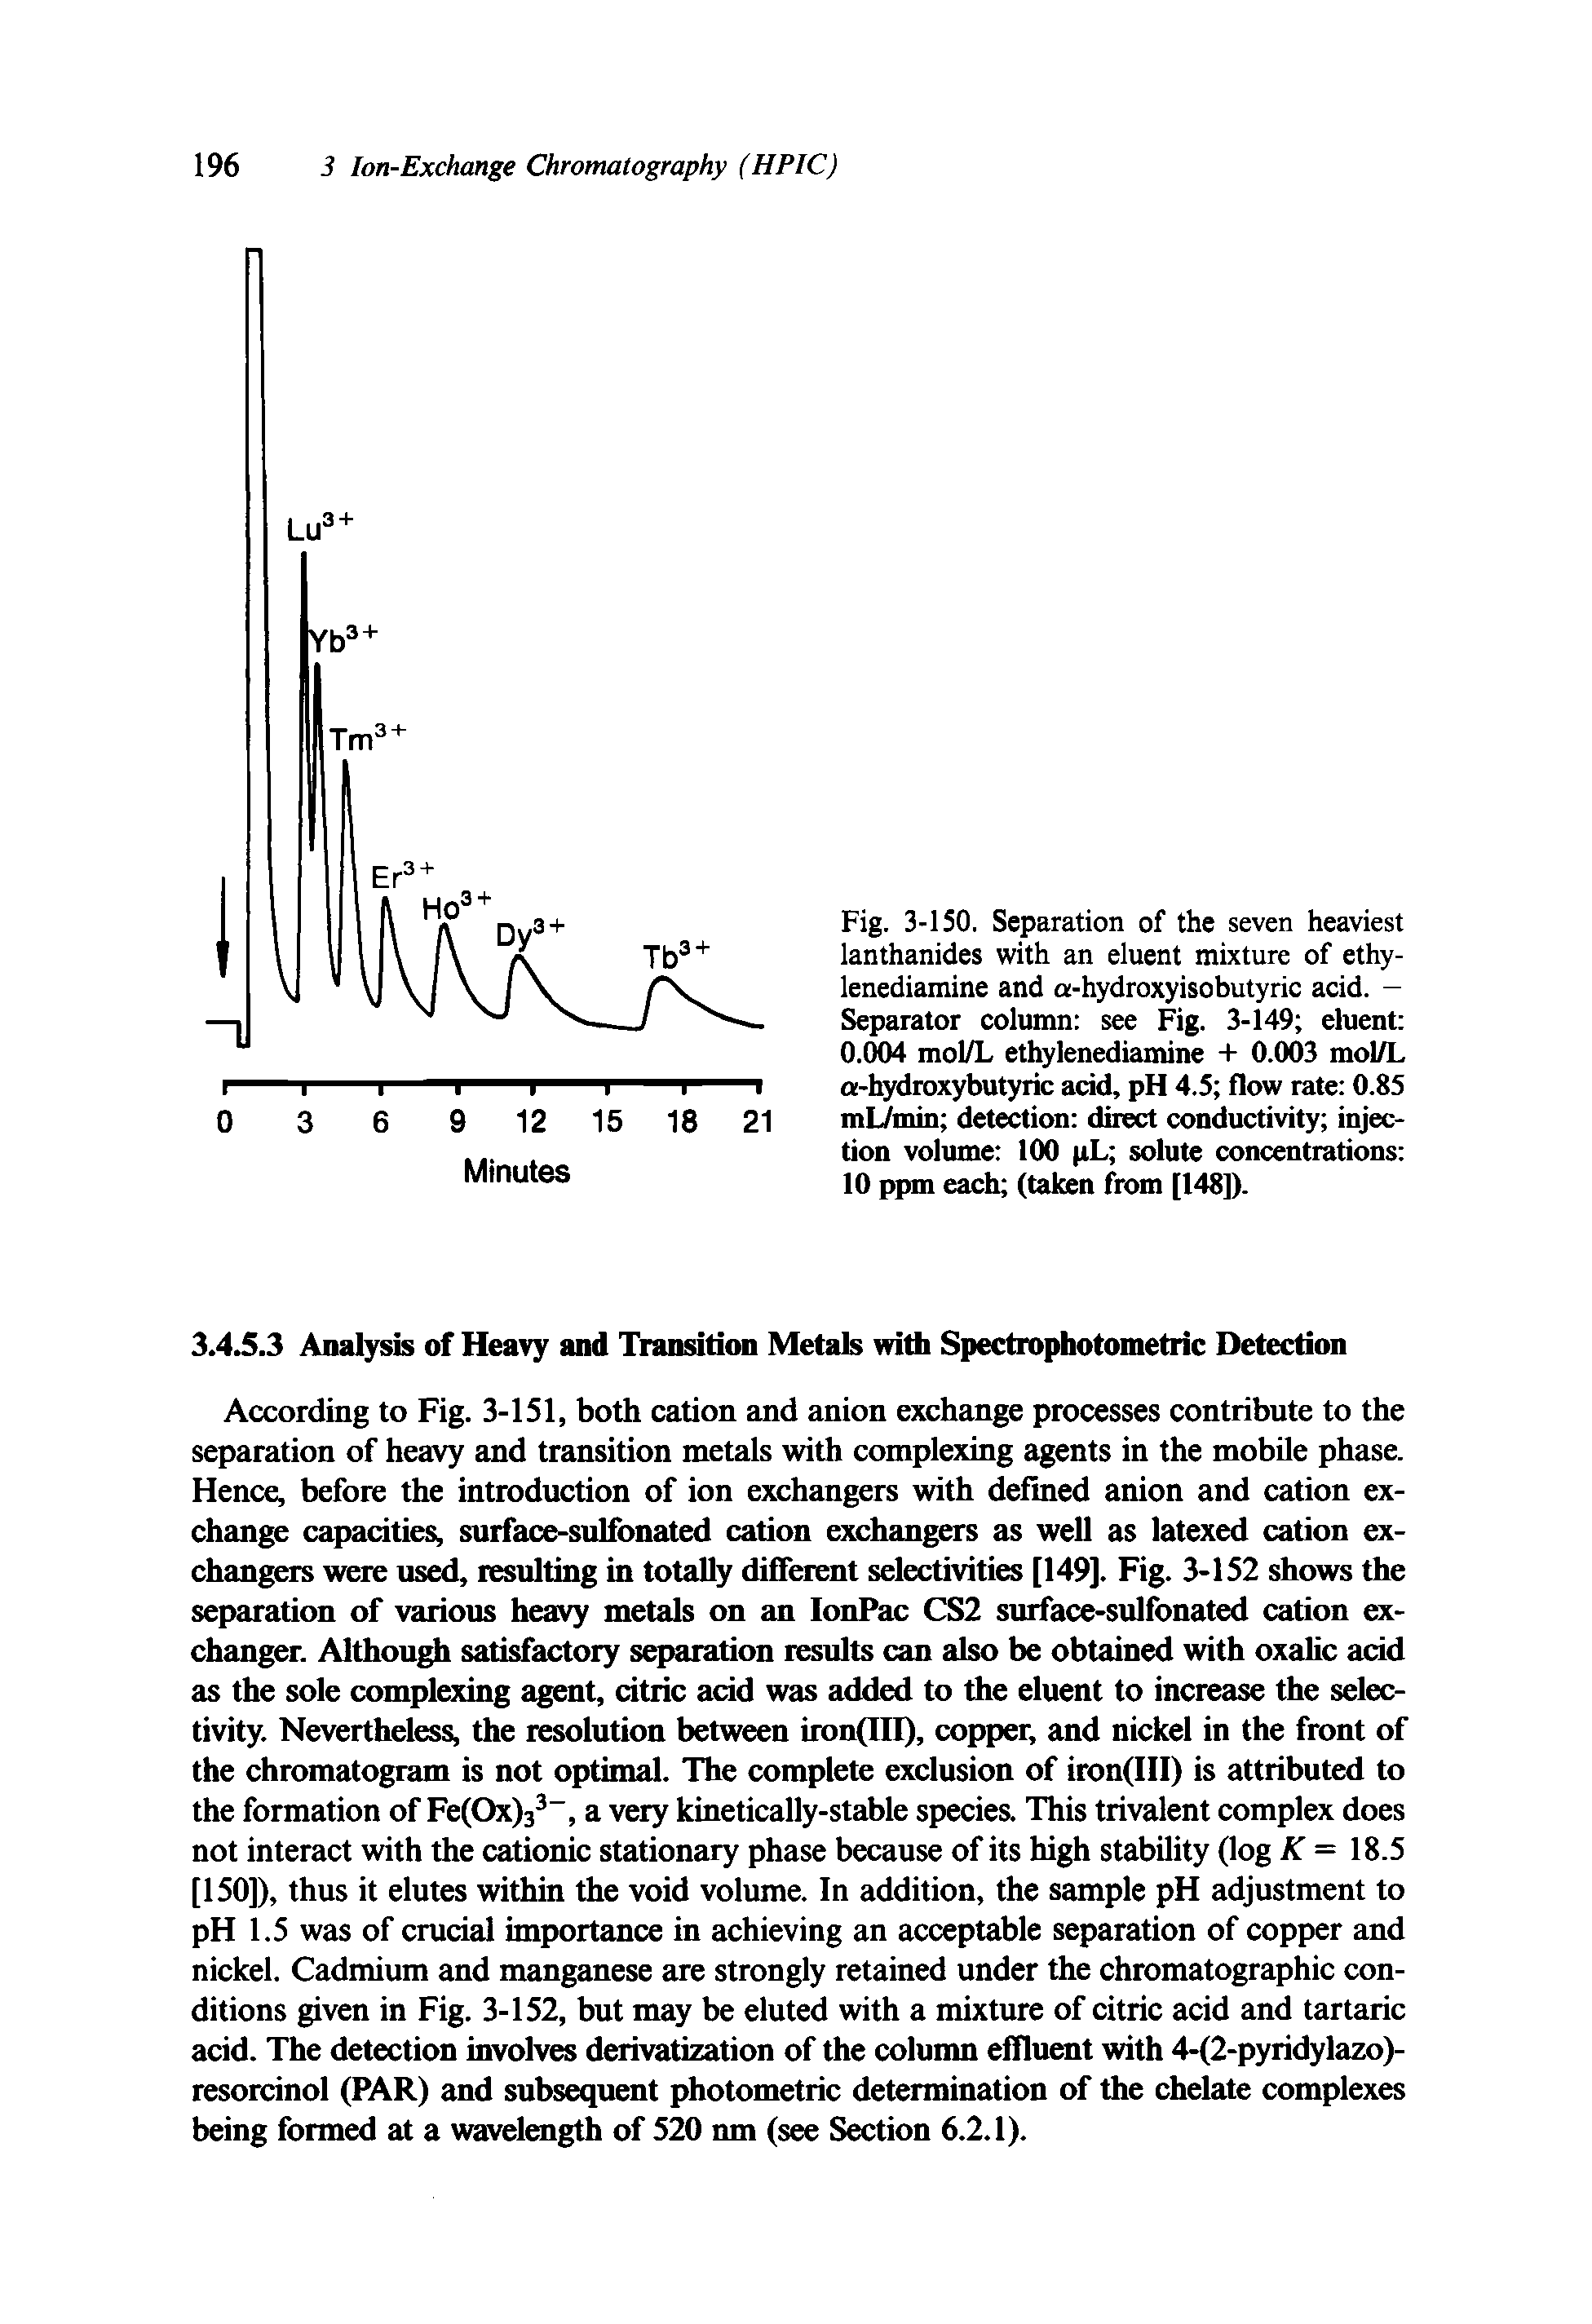 Fig. 3-150. Separation of the seven heaviest lanthanides with an eluent mixture of ethy-lenediamine and a-hydroxyisobutyric acid. -Separator column see Fig. 3-149 eluent 0.004 mol/L ethylenediamine + 0.003 mol/L a-hydroxybutyric acid, pH 4.5 flow rate 0.85 mL/min detection direct conductivity injection volume 100 pL solute concentrations 10 ppm each (taken from [148]).